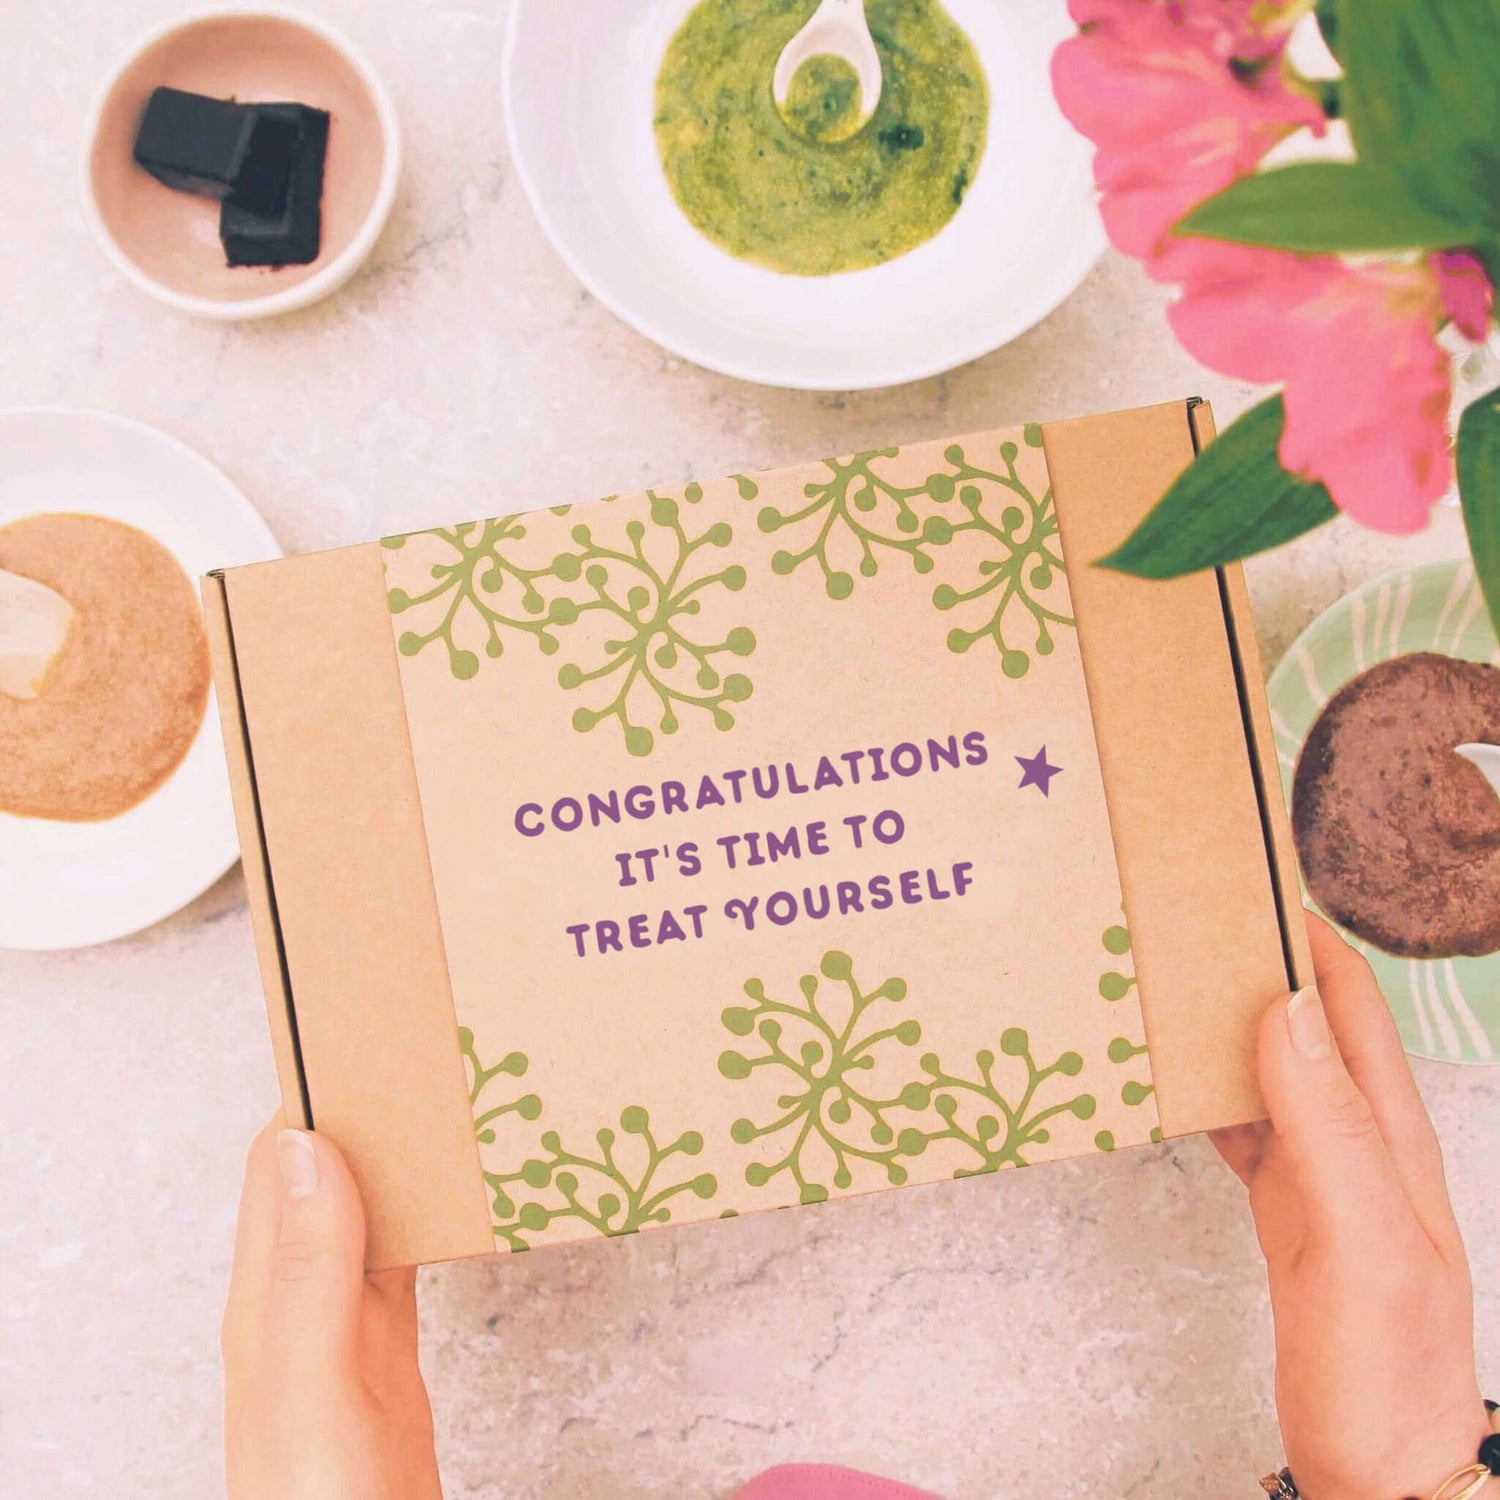 congratulations letterbox gift with gift message 'congratulations, it's time to treat yourself'